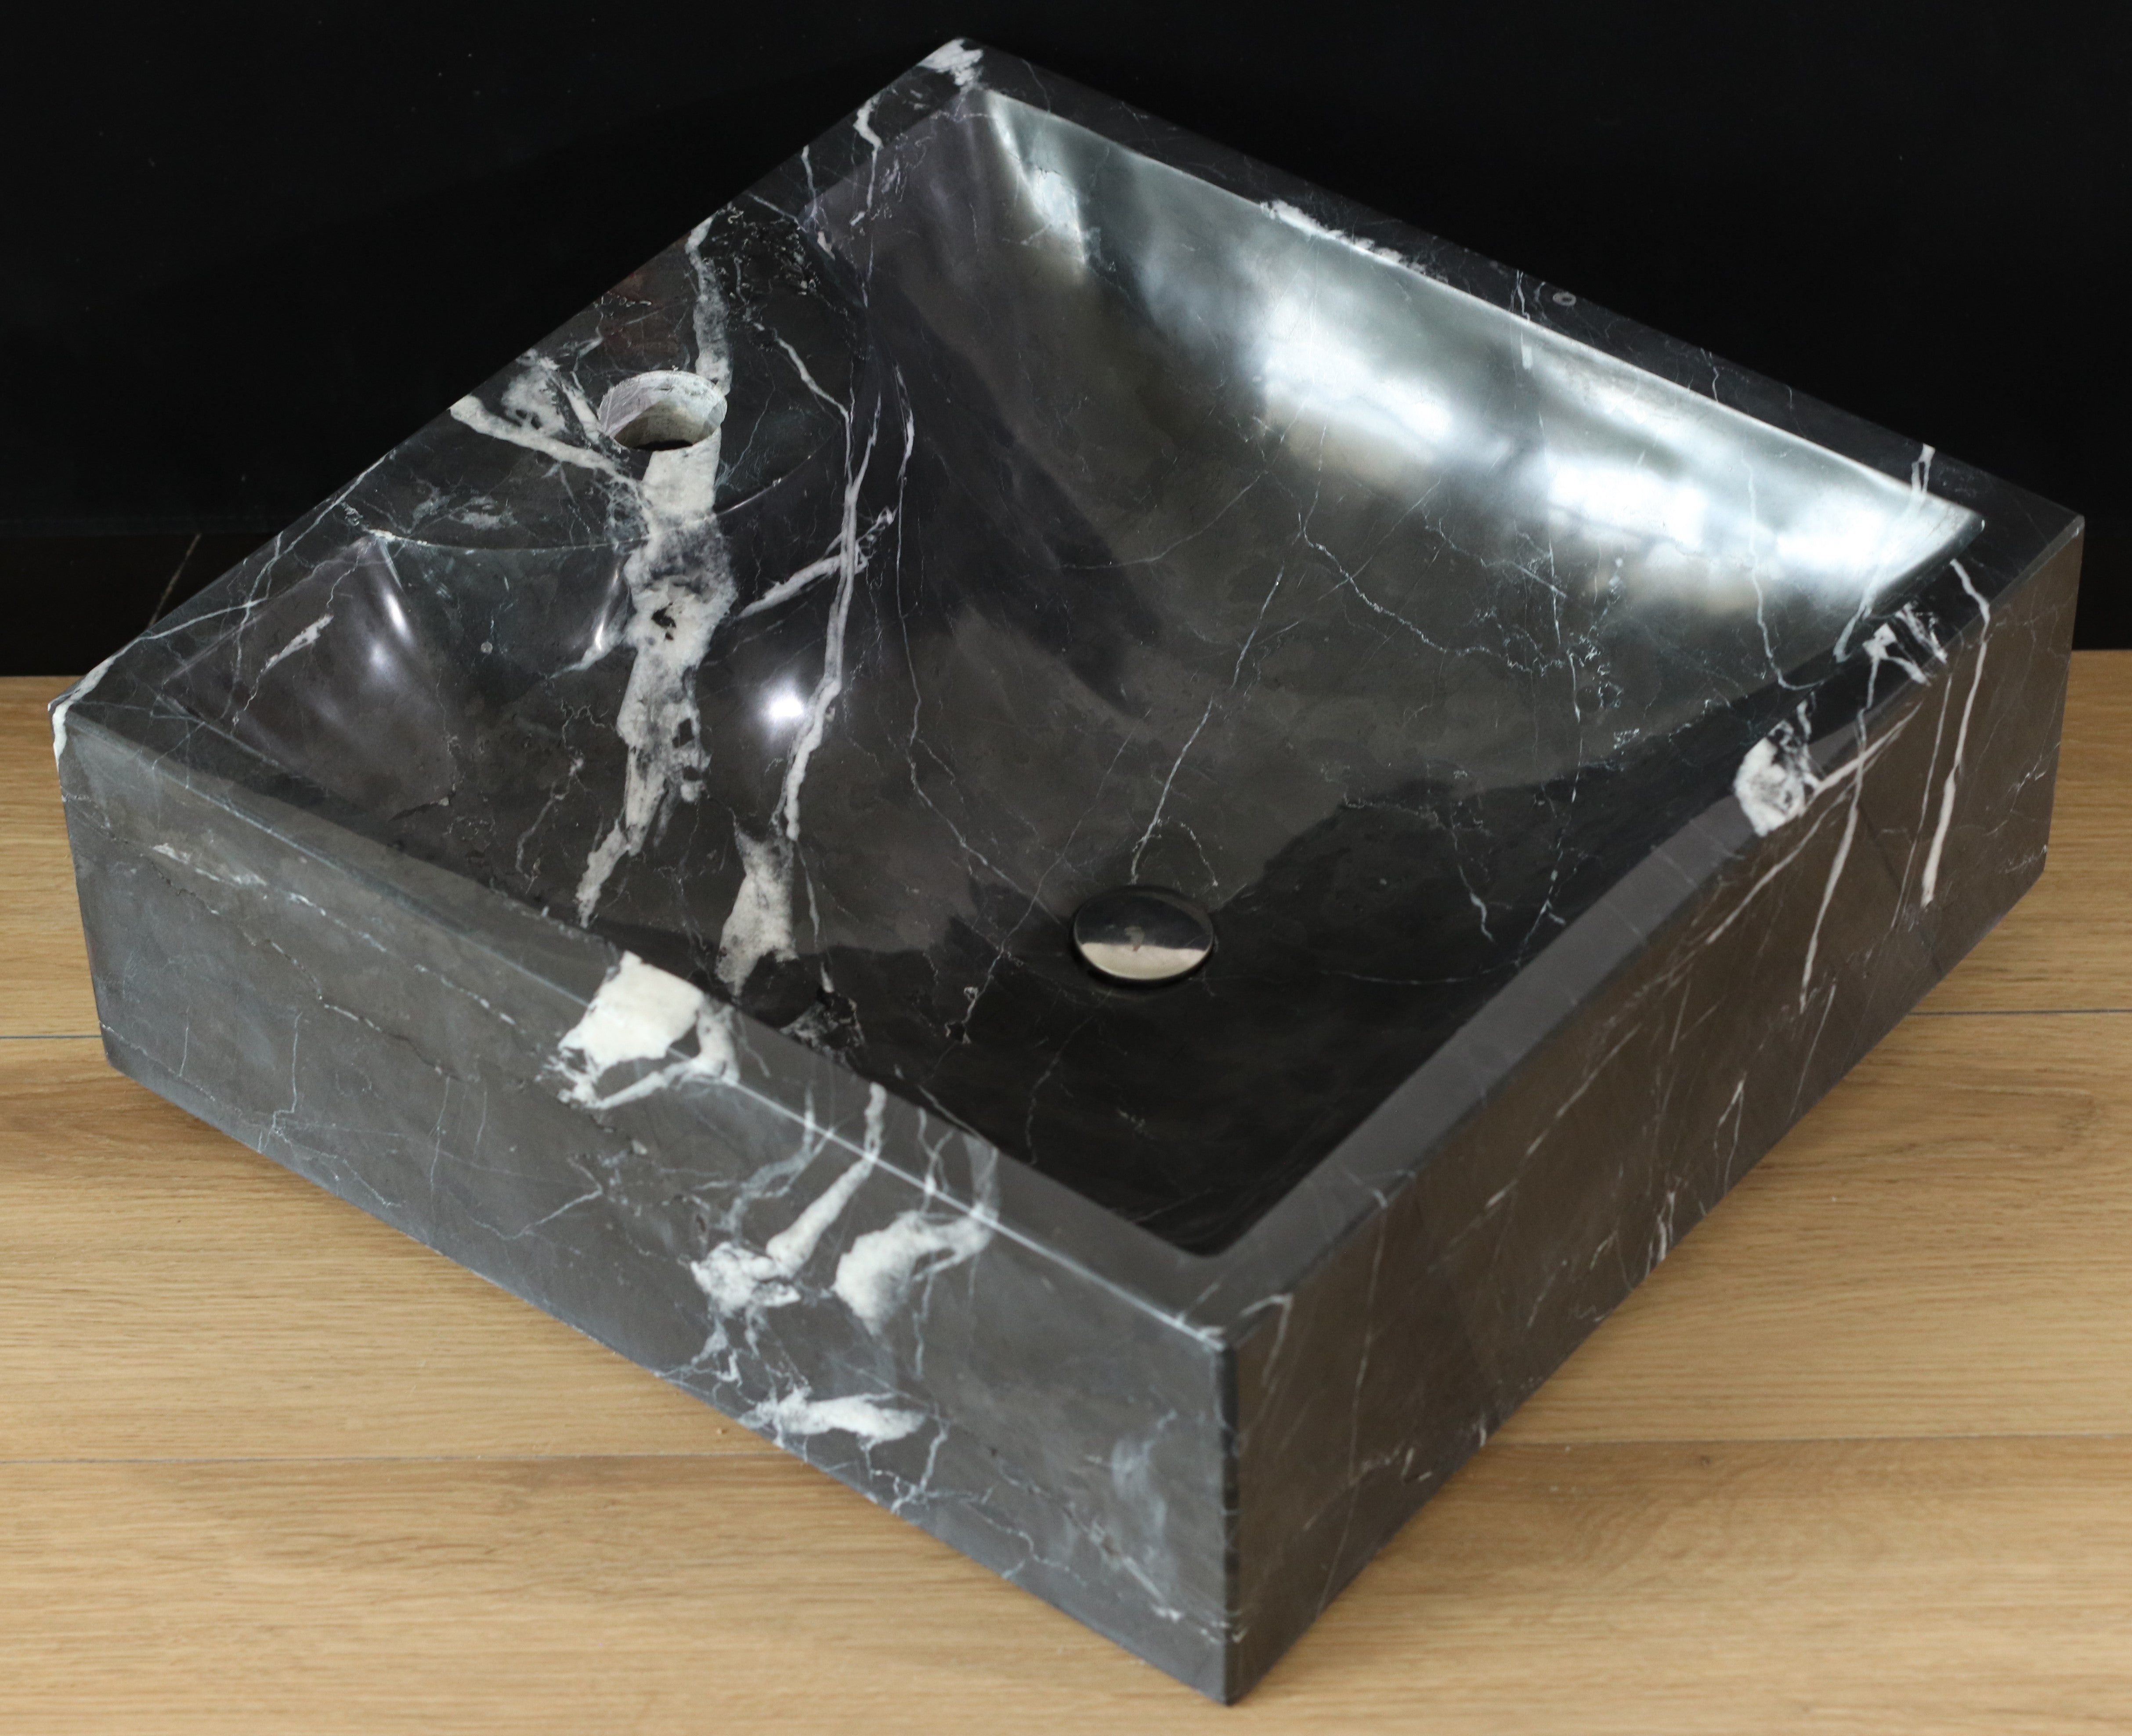 Square Black Marble Vessel Bathroom Sink. Handmade in Mexico. Ships from the USA. A beautiful work of art. Buy now at www.felipeandgrace.com. 